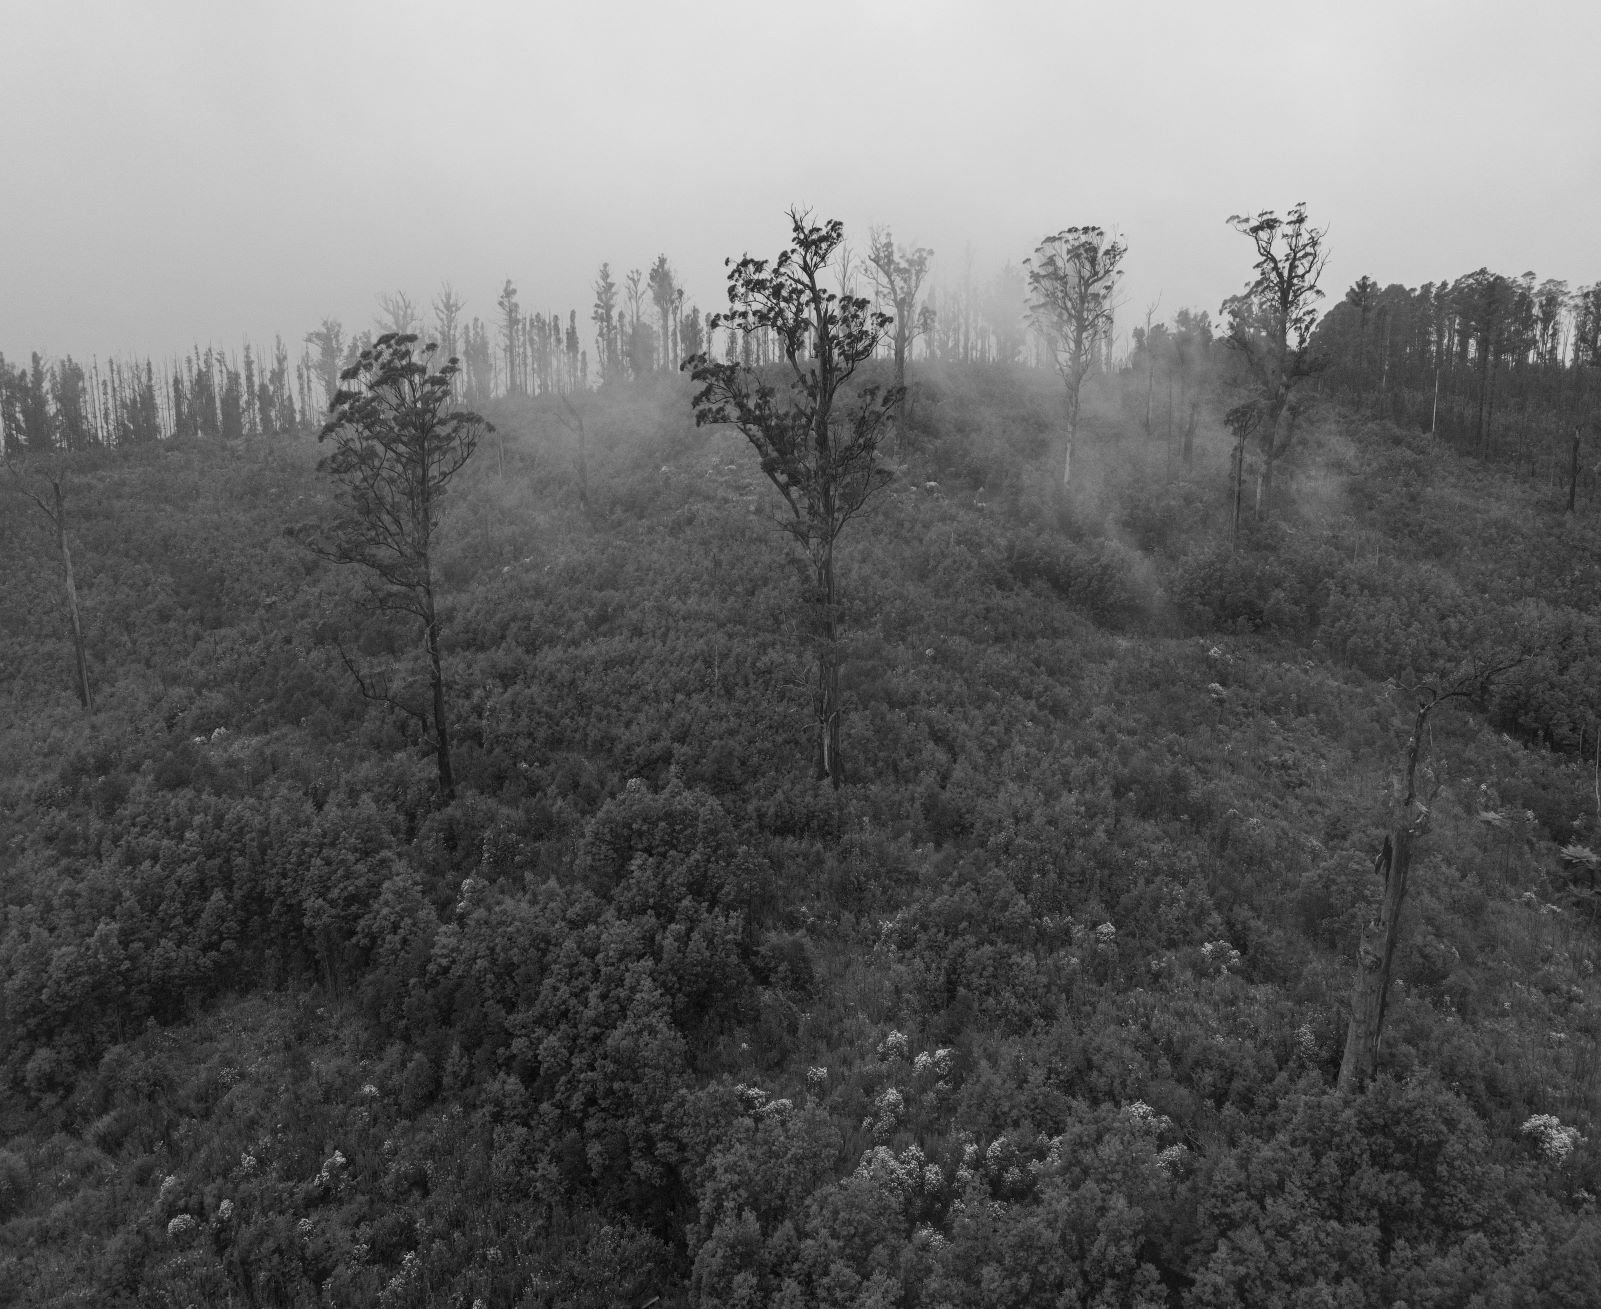  Habitat trees left standing in a logging coupe shrouded in a mirky mist. 